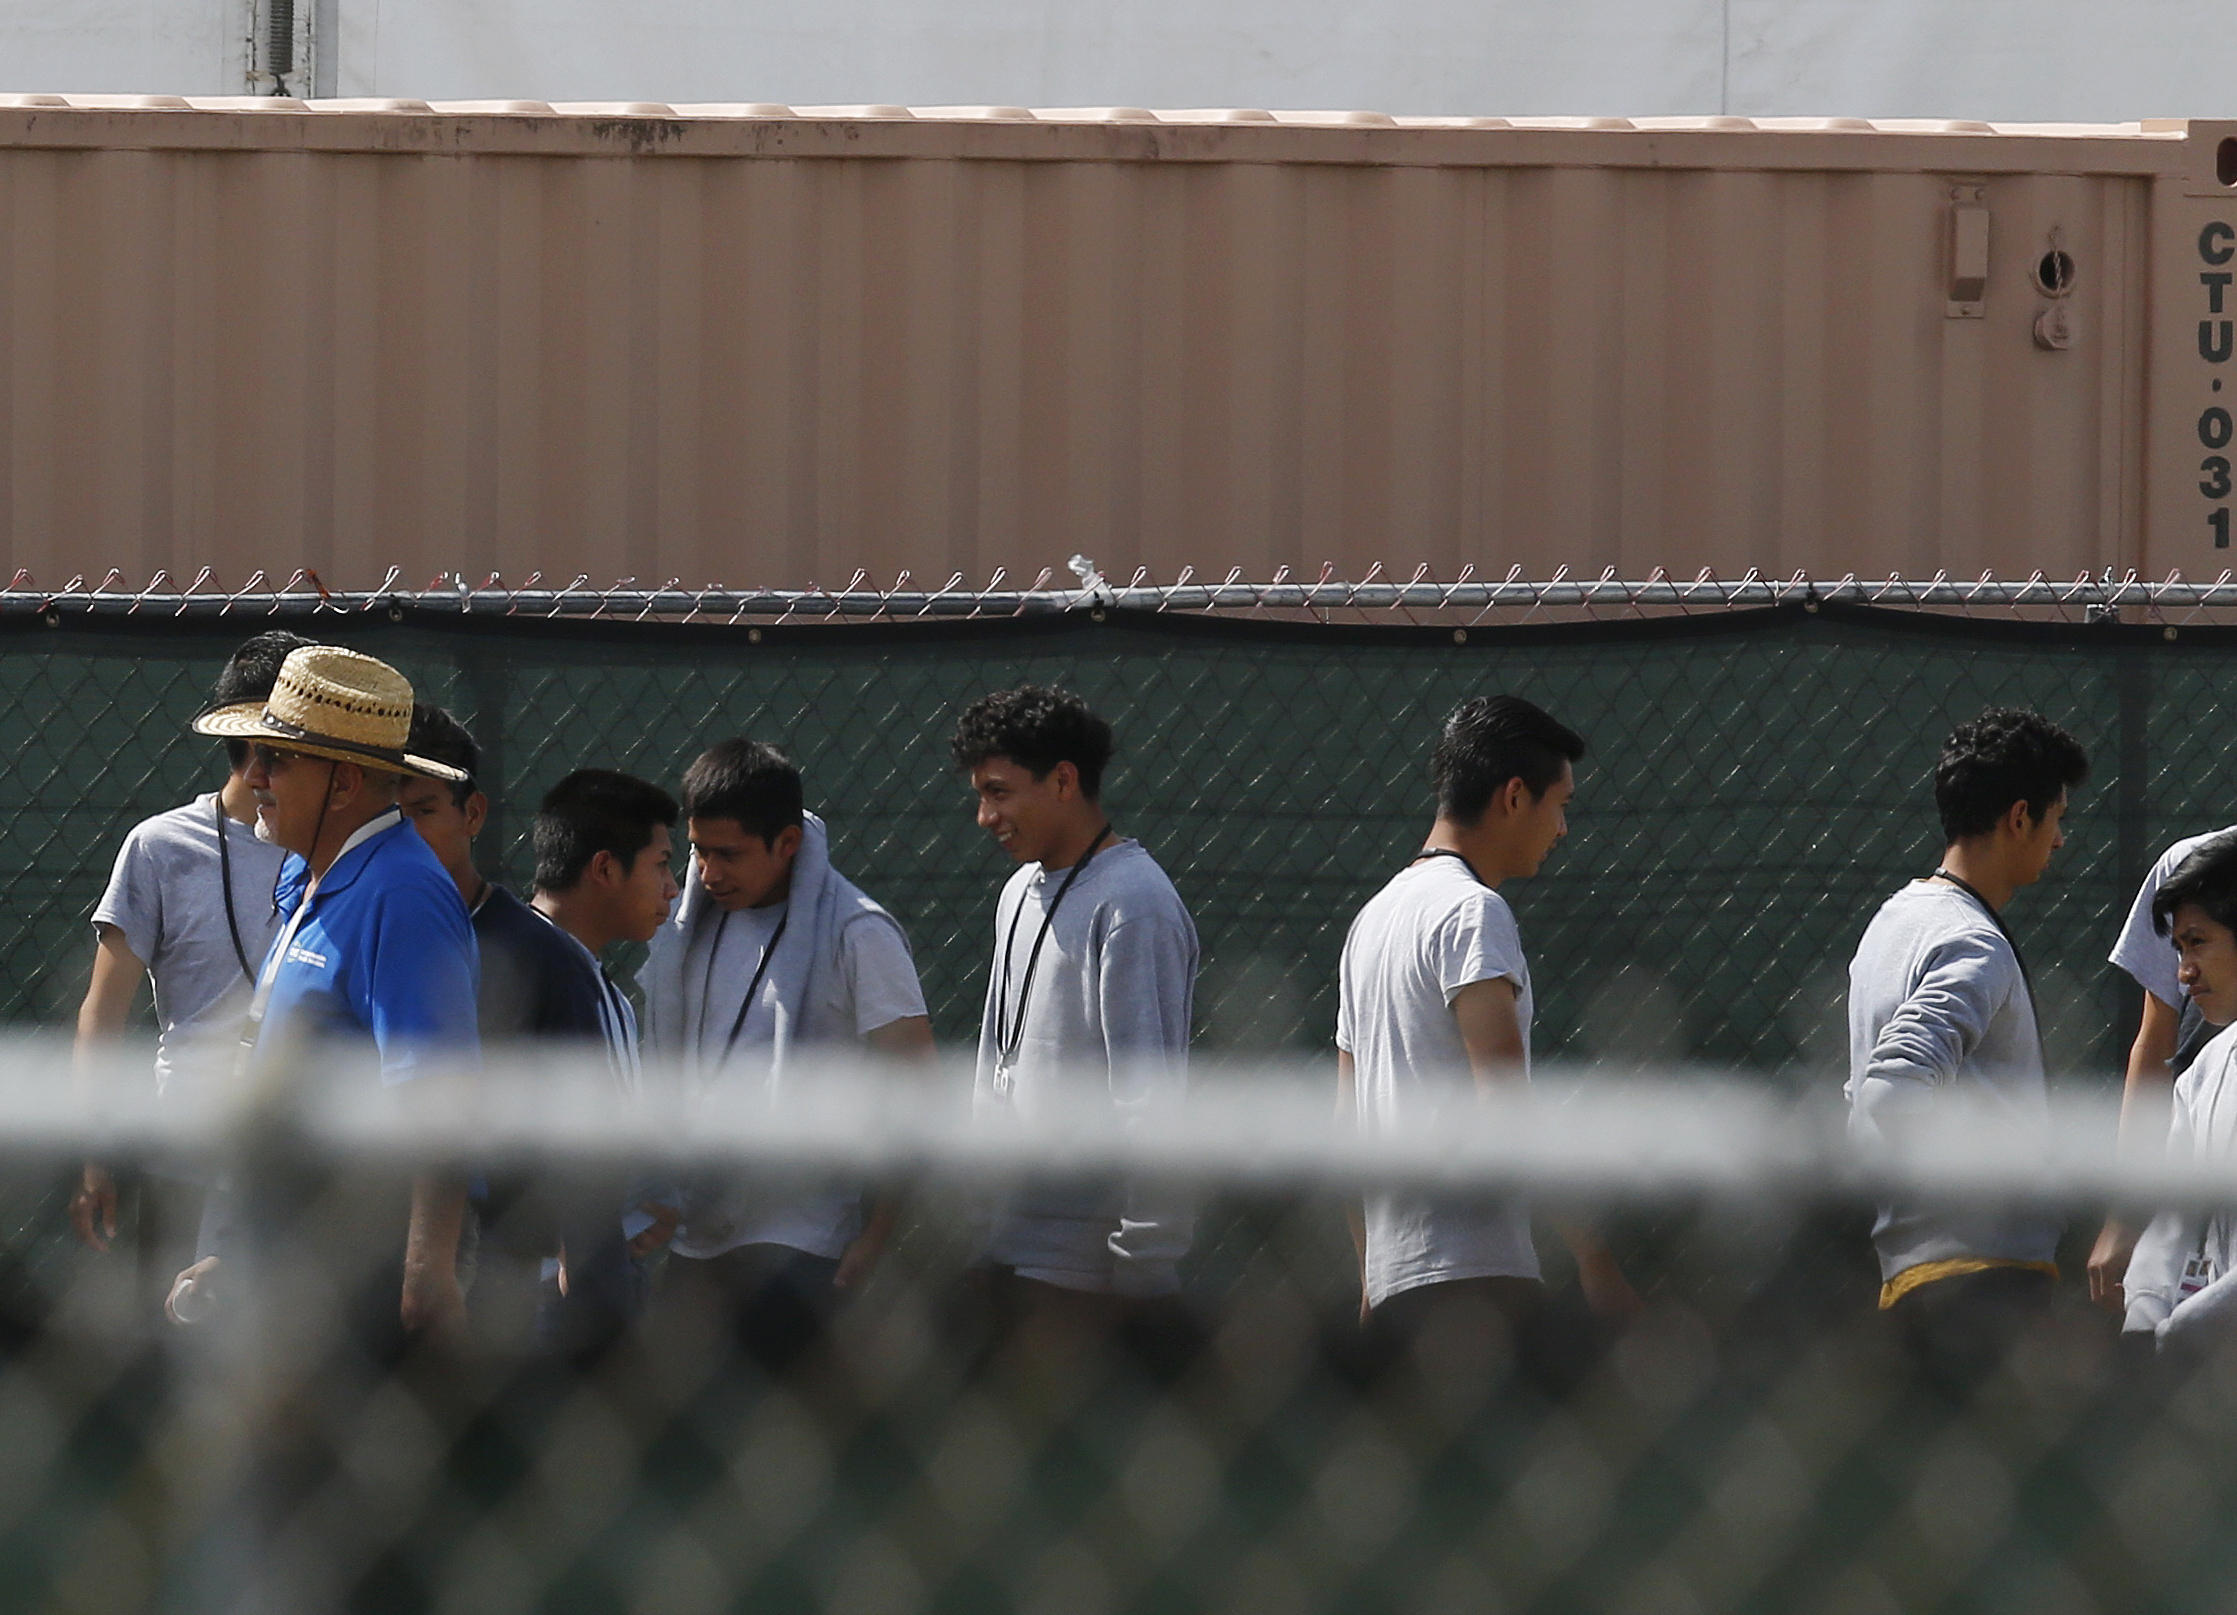 Migrant children walk outside at the Homestead Temporary Shelter for Unaccompanied Children a former Job Corps site that now houses them, on Friday, June 22, 2018, in Homestead, Fla. U.S. officials provided a glimpse into the South Florida facility housing more than 1,000 teen-age migrants, seeking to dispel any suggestions that children are being mistreated. The tour included dorm-style buildings where children sleep up to 12 per room in steel-framed bunk beds, and warehouse-sized, air-conditioned white tents where minors attend classes and watch movies. (AP Photo/Brynn Anderson)